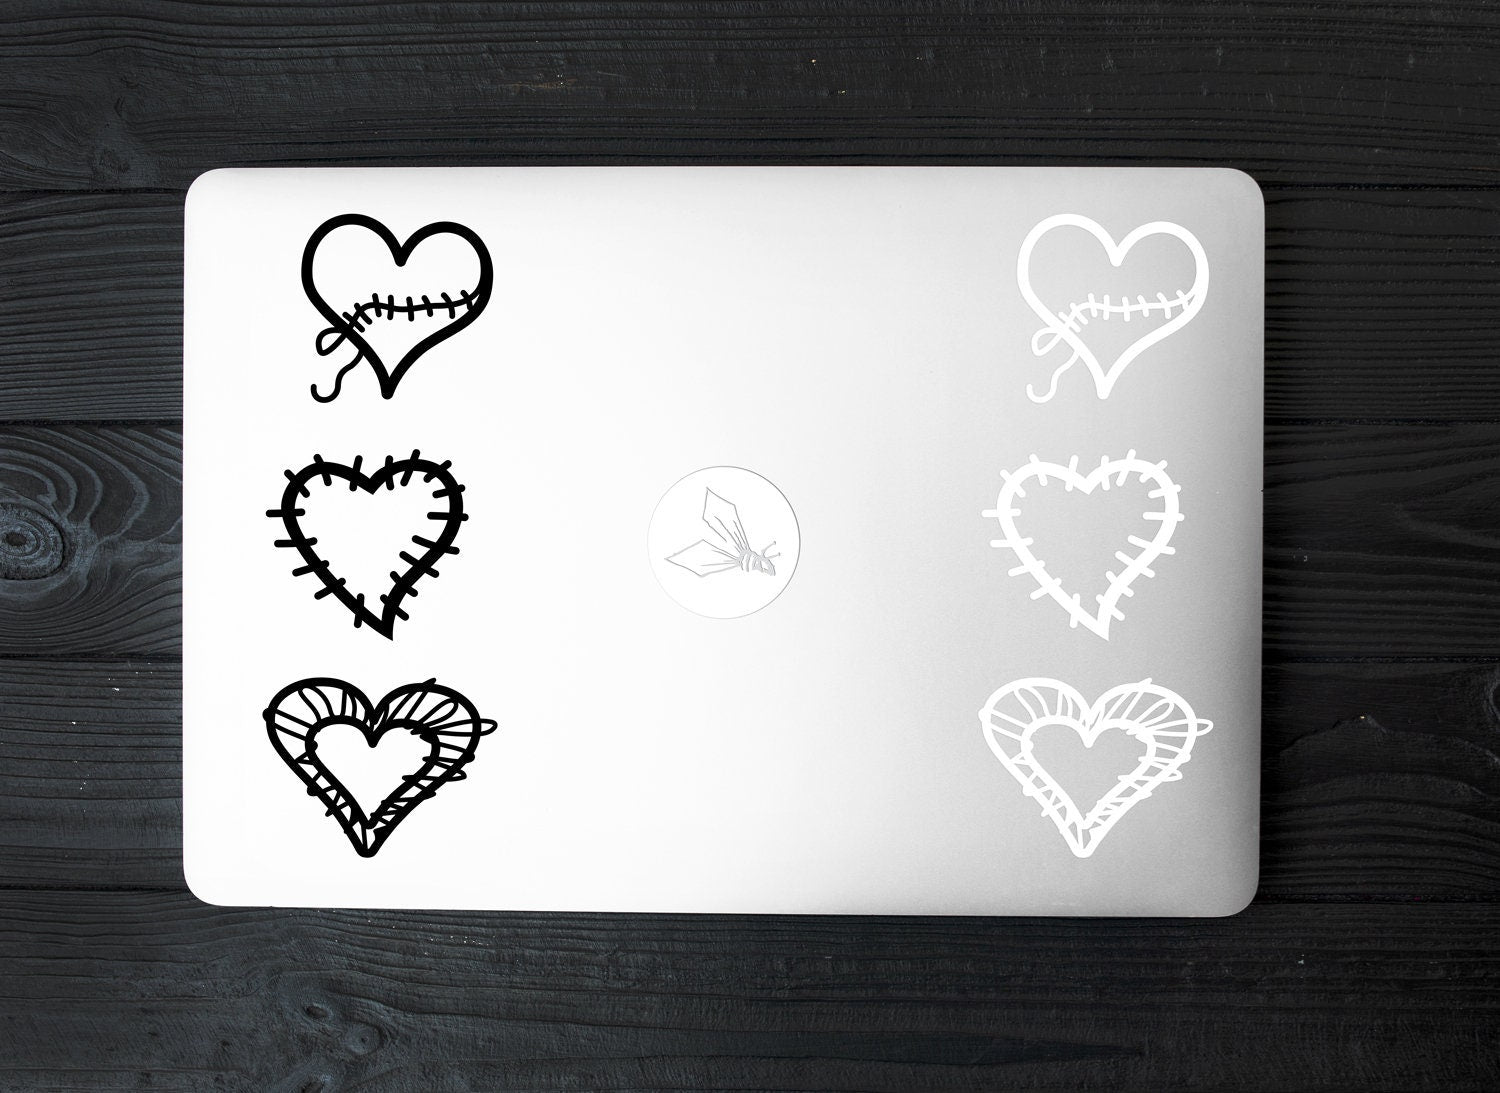 Anatomical Heart Drawing - 3 inch Vinyl Sticker - for Car Laptop Water Bottle Phone - Waterproof Decal